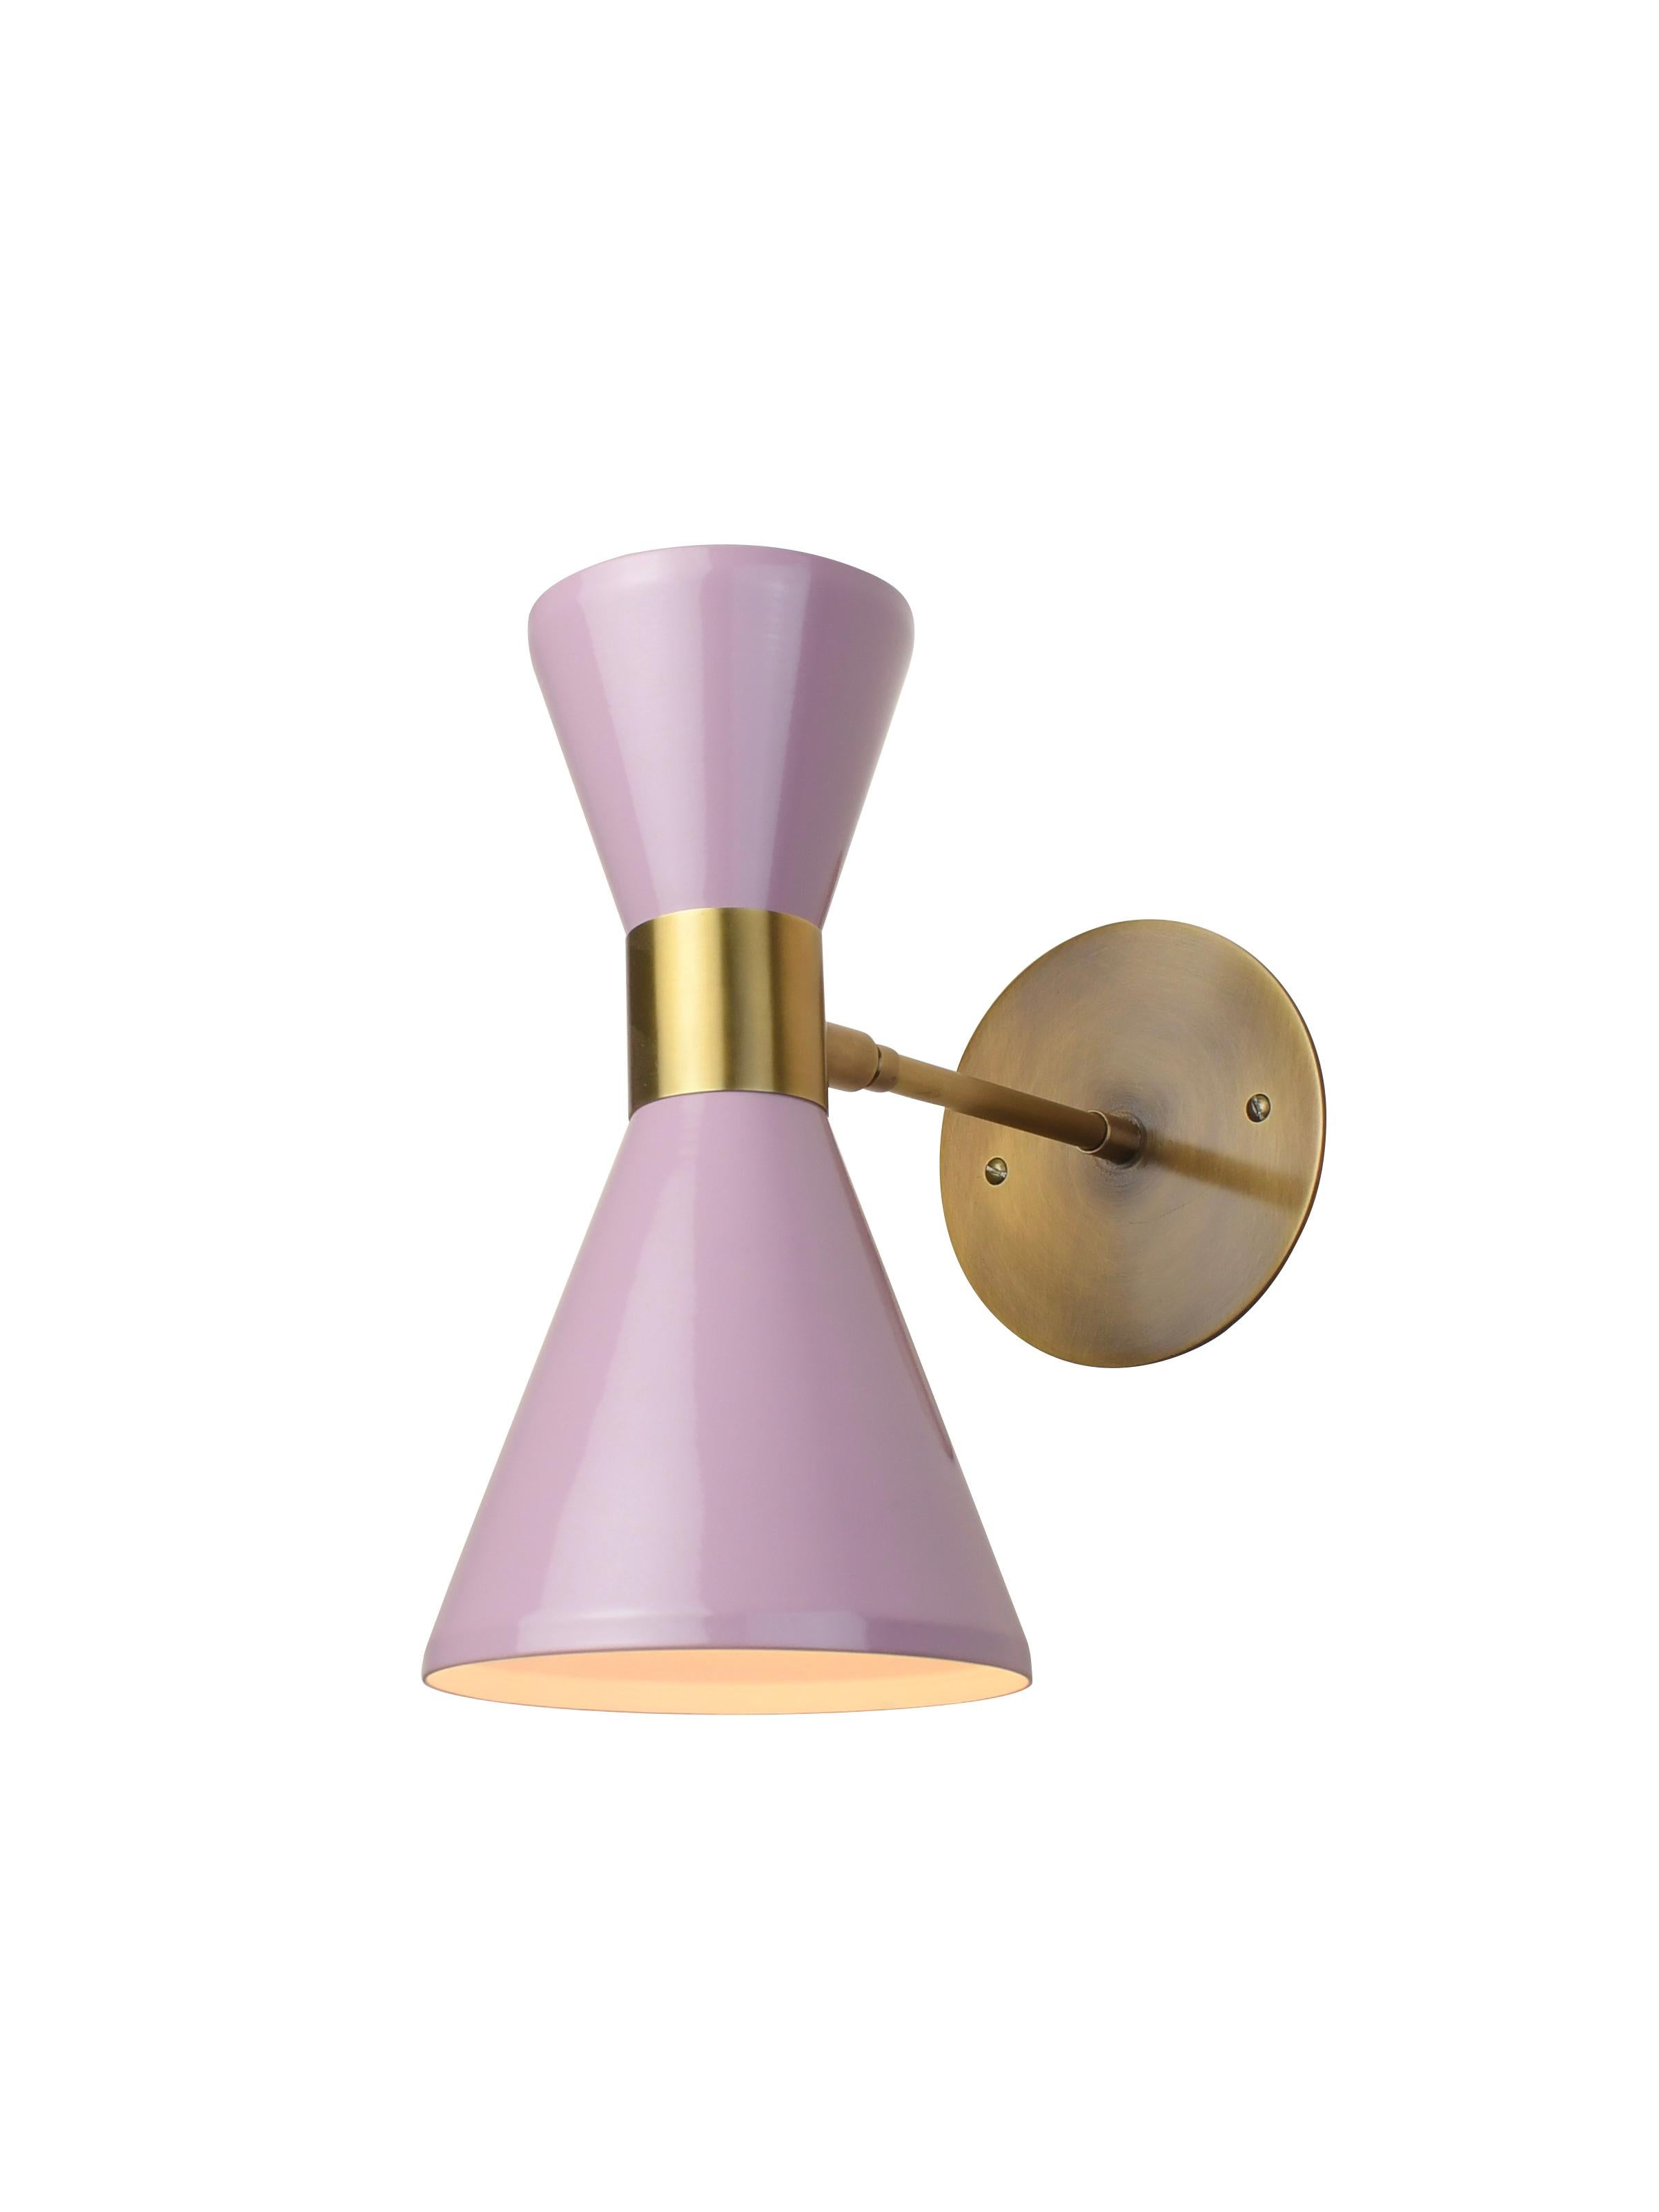 The Campana wall sconce or reading light shown in brushed brass and lilac enamel by Blueprint Lighting, 2018. The wide band and distinctly bevelled edge makes the Campana a strong design statement. Swiveling head allows for cone adjustment. The spun